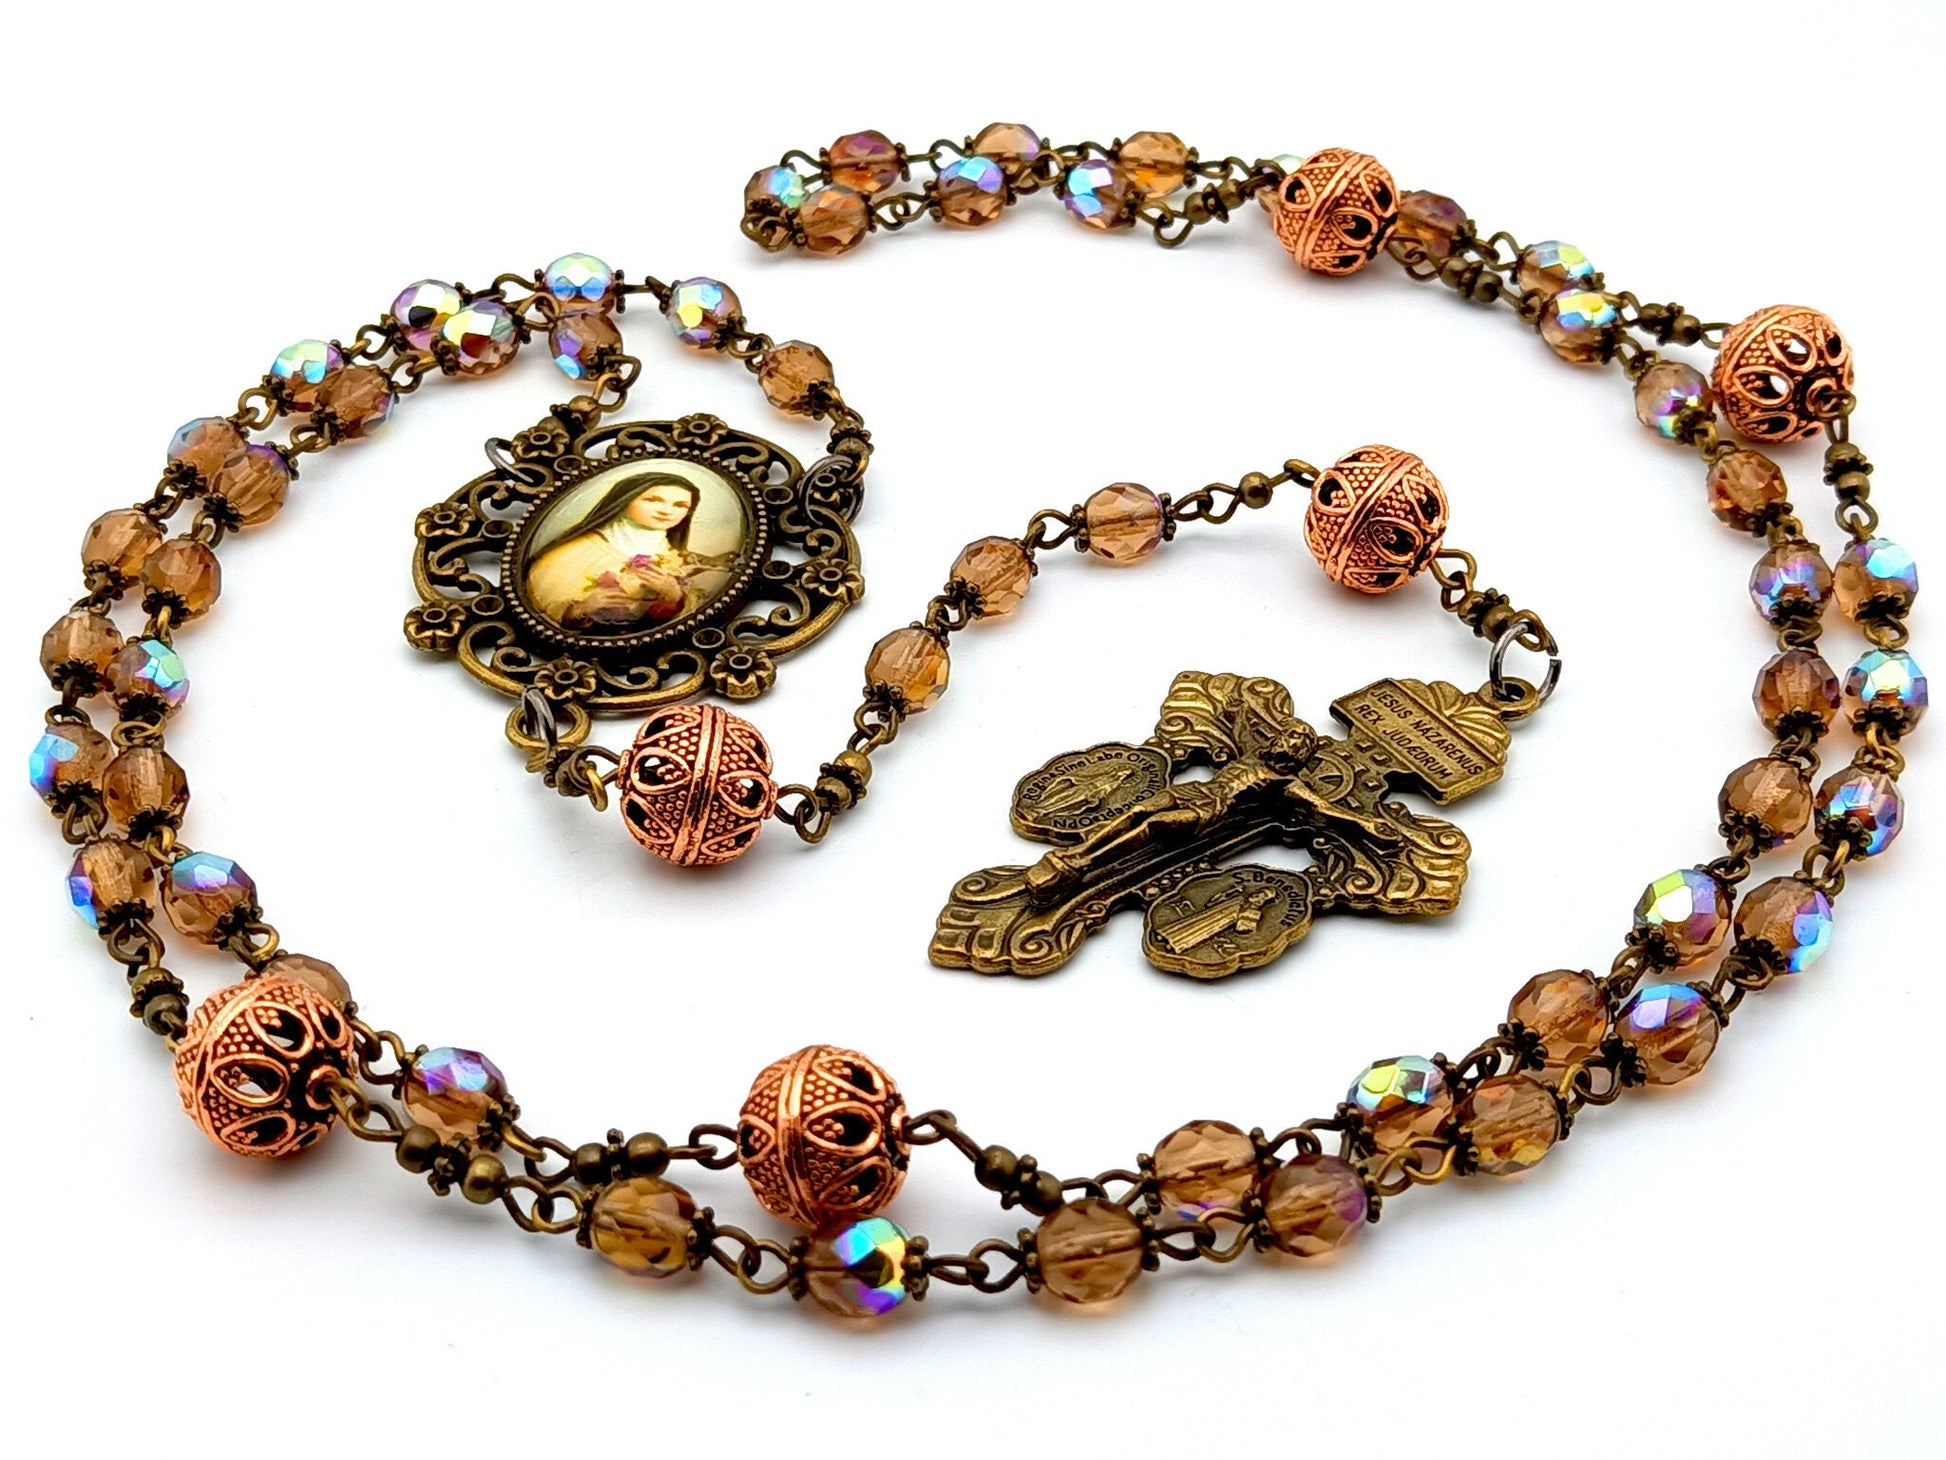 Saint Therese of Lisieux unique rosary beads with rose gold faceted glass and copper beads, bronze pardon crucifix and picture centre medal.